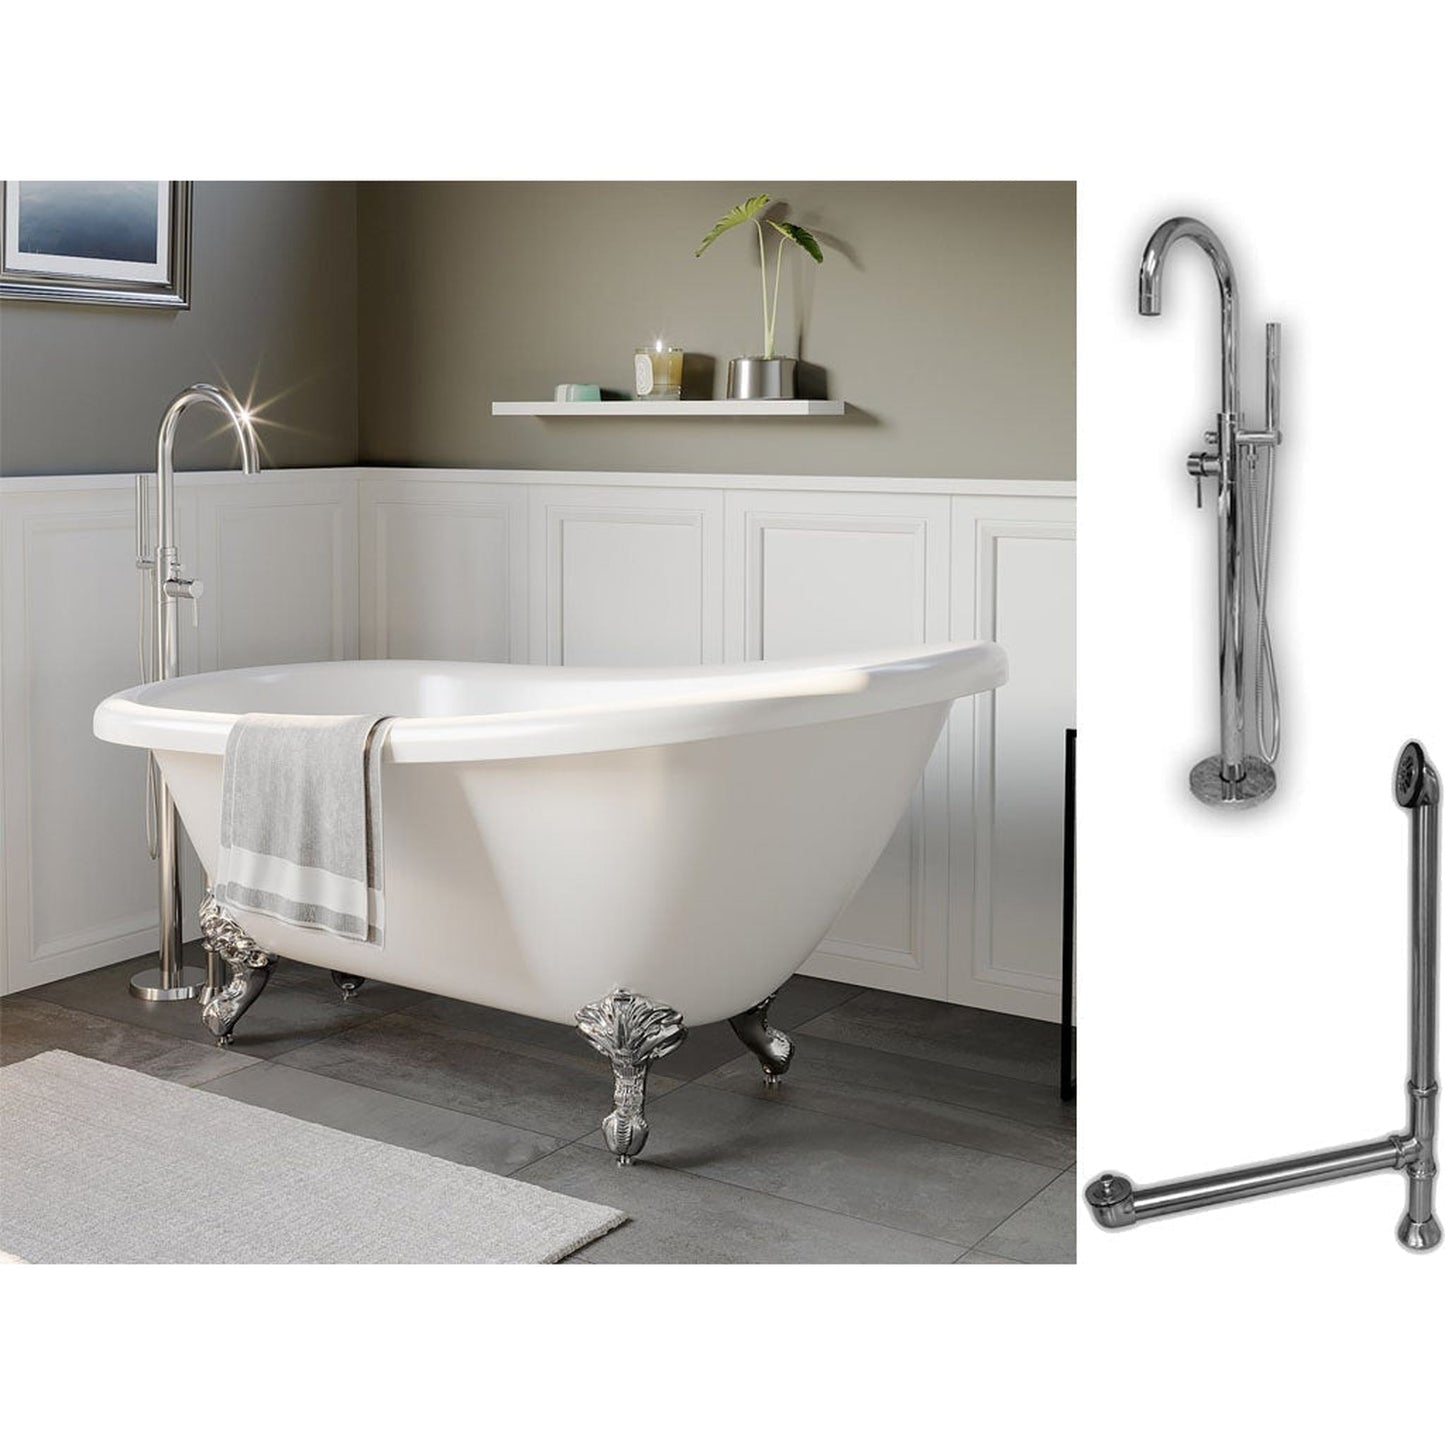 Cambridge Plumbing 67" White Acrylic Single Slipper Clawfeet Bathtub With No Deck Holes And Complete Plumbing Package Including Modern Floor Mounted Faucet, Supply Lines, Drain And Overflow Assembly In Polished Chrome